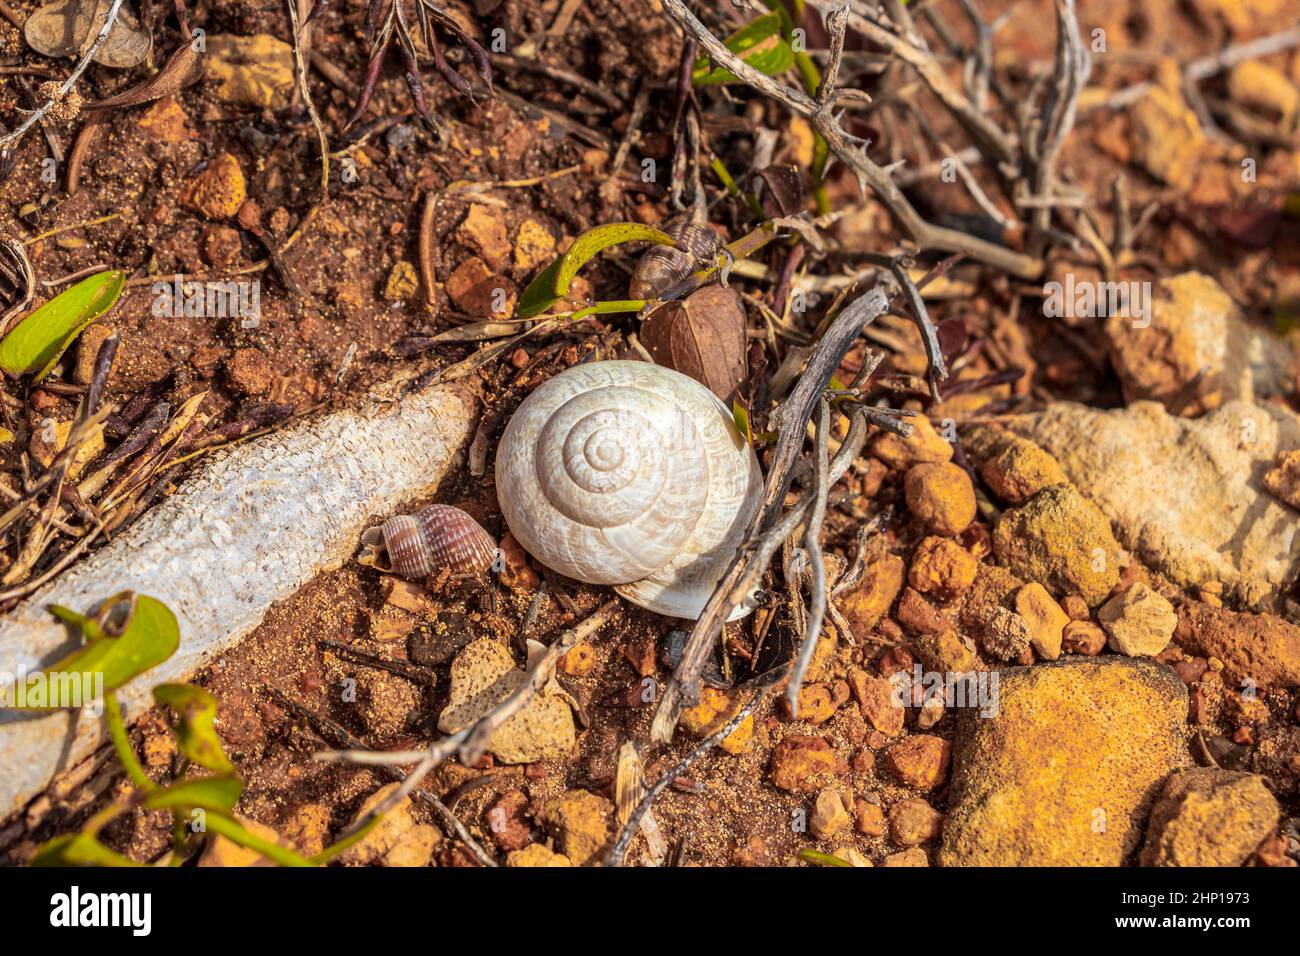 Small white clam on the ground in Mallorca Spain. Stock Photo